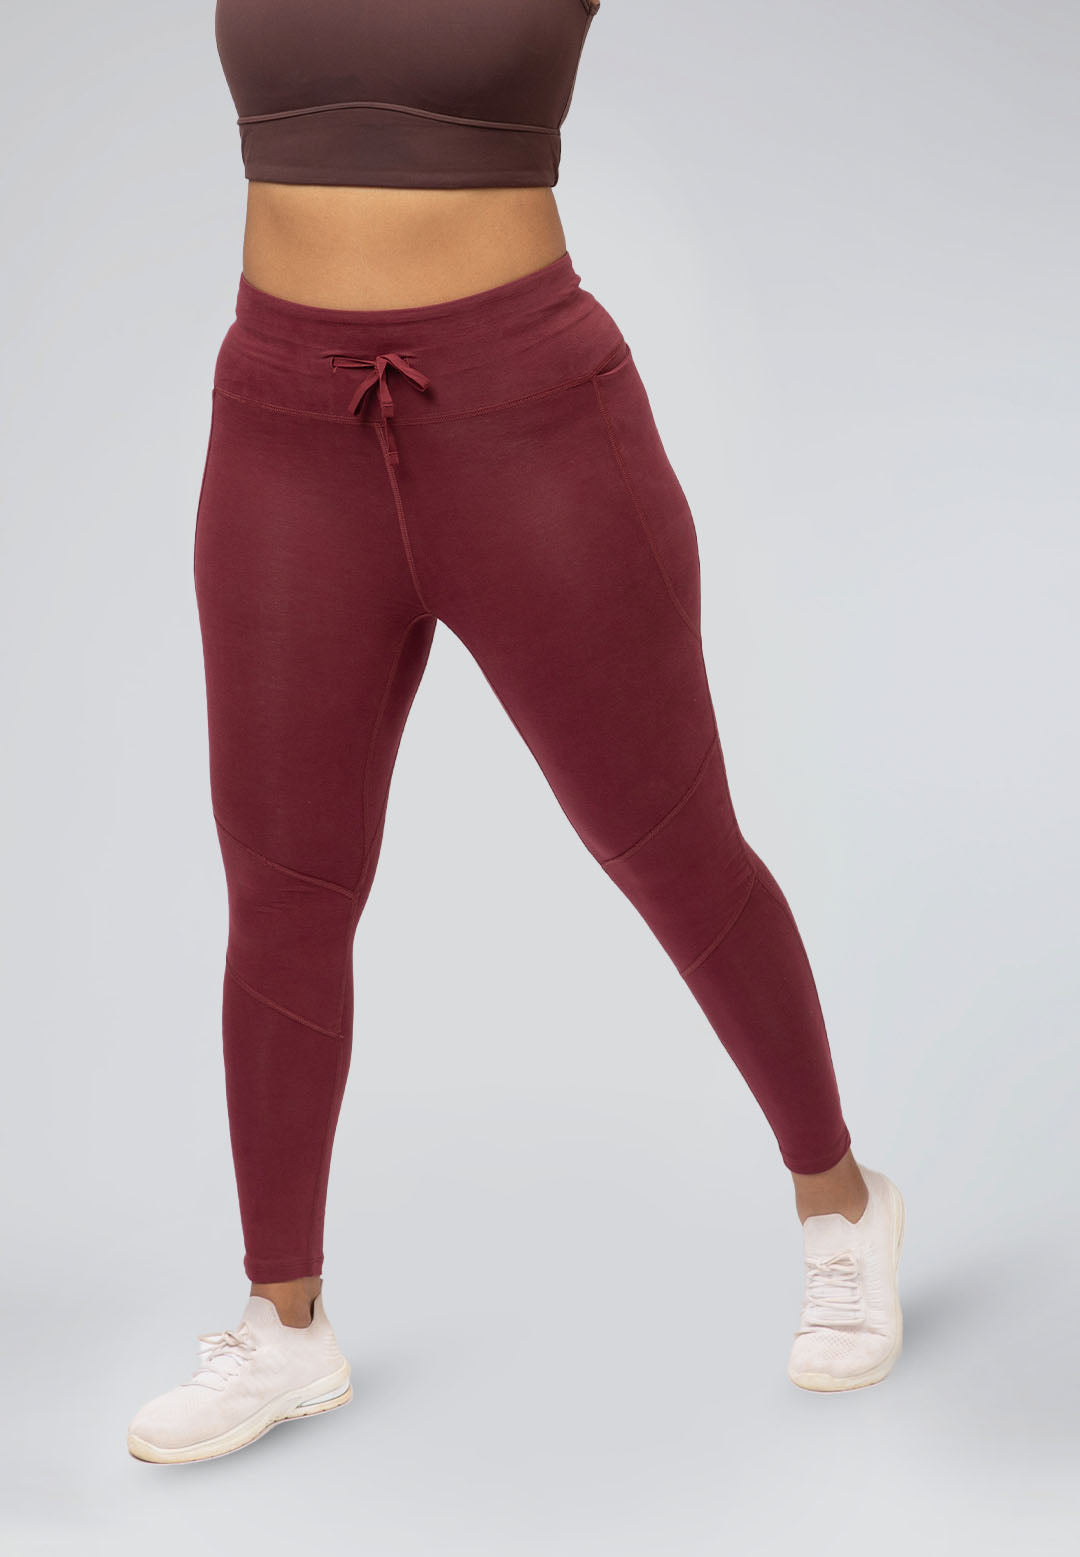 High-Waisted Cotton Leggings with 3 Pockets